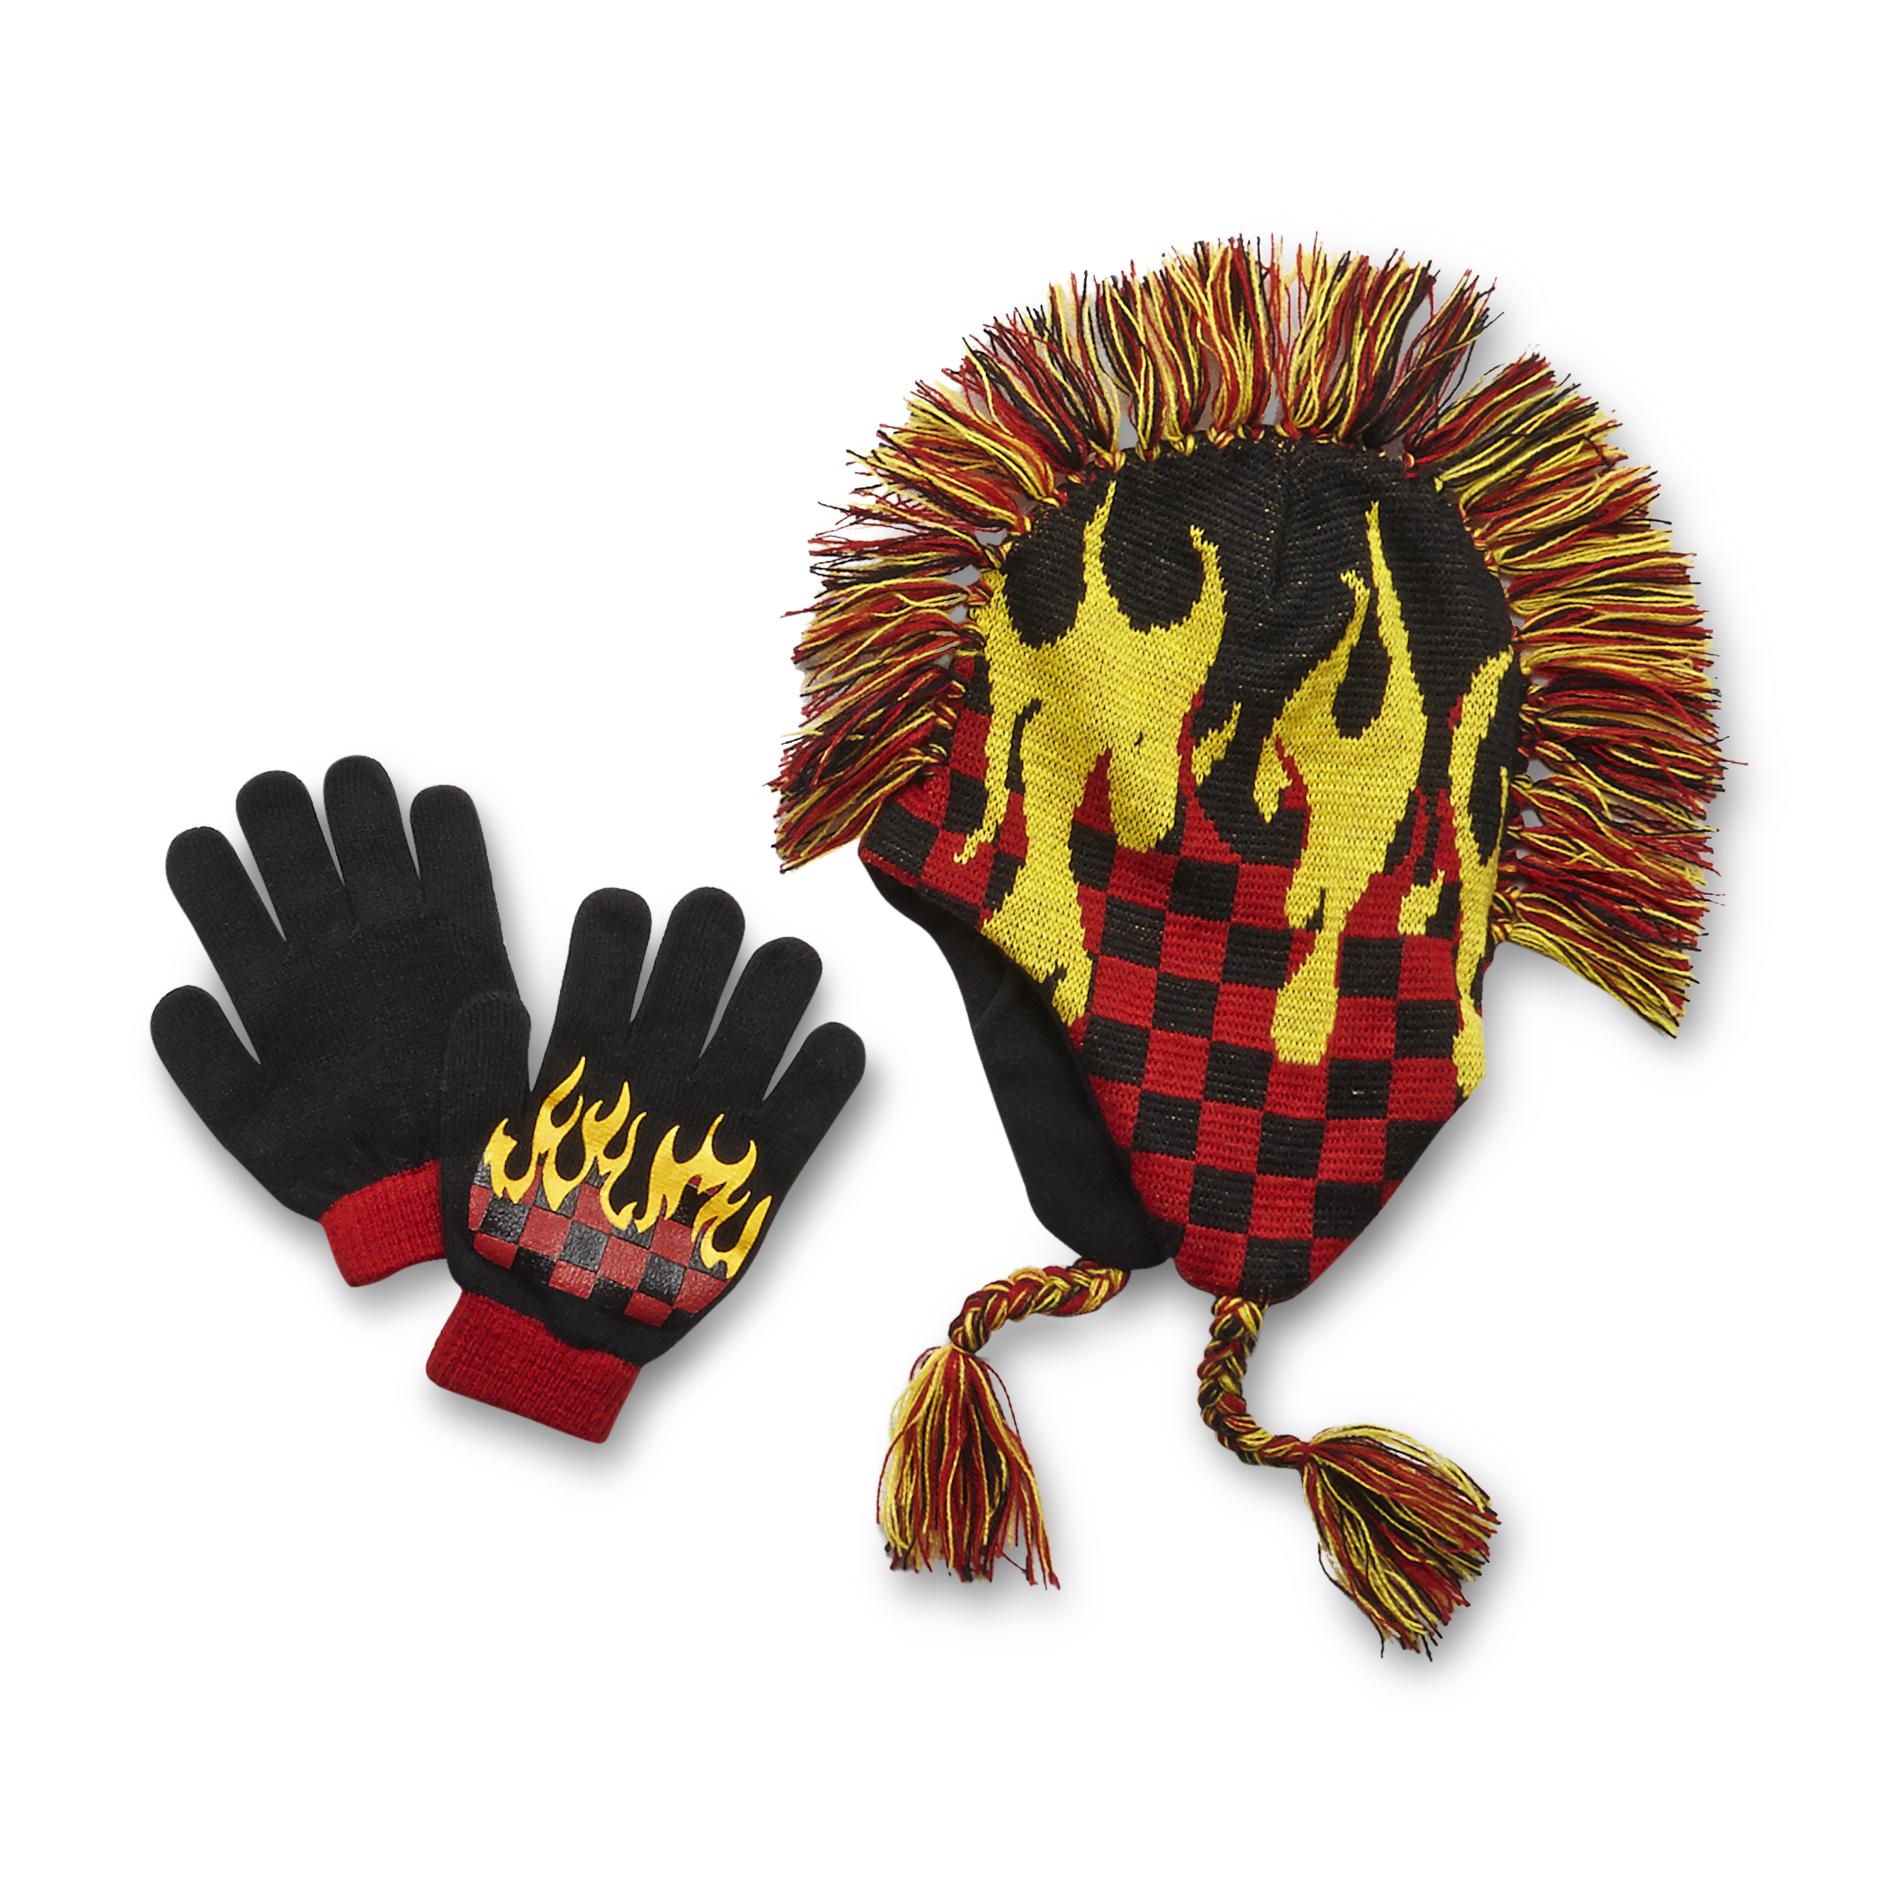 Athletech Boy's Lined Peruvian Hat & Gloves - Flame